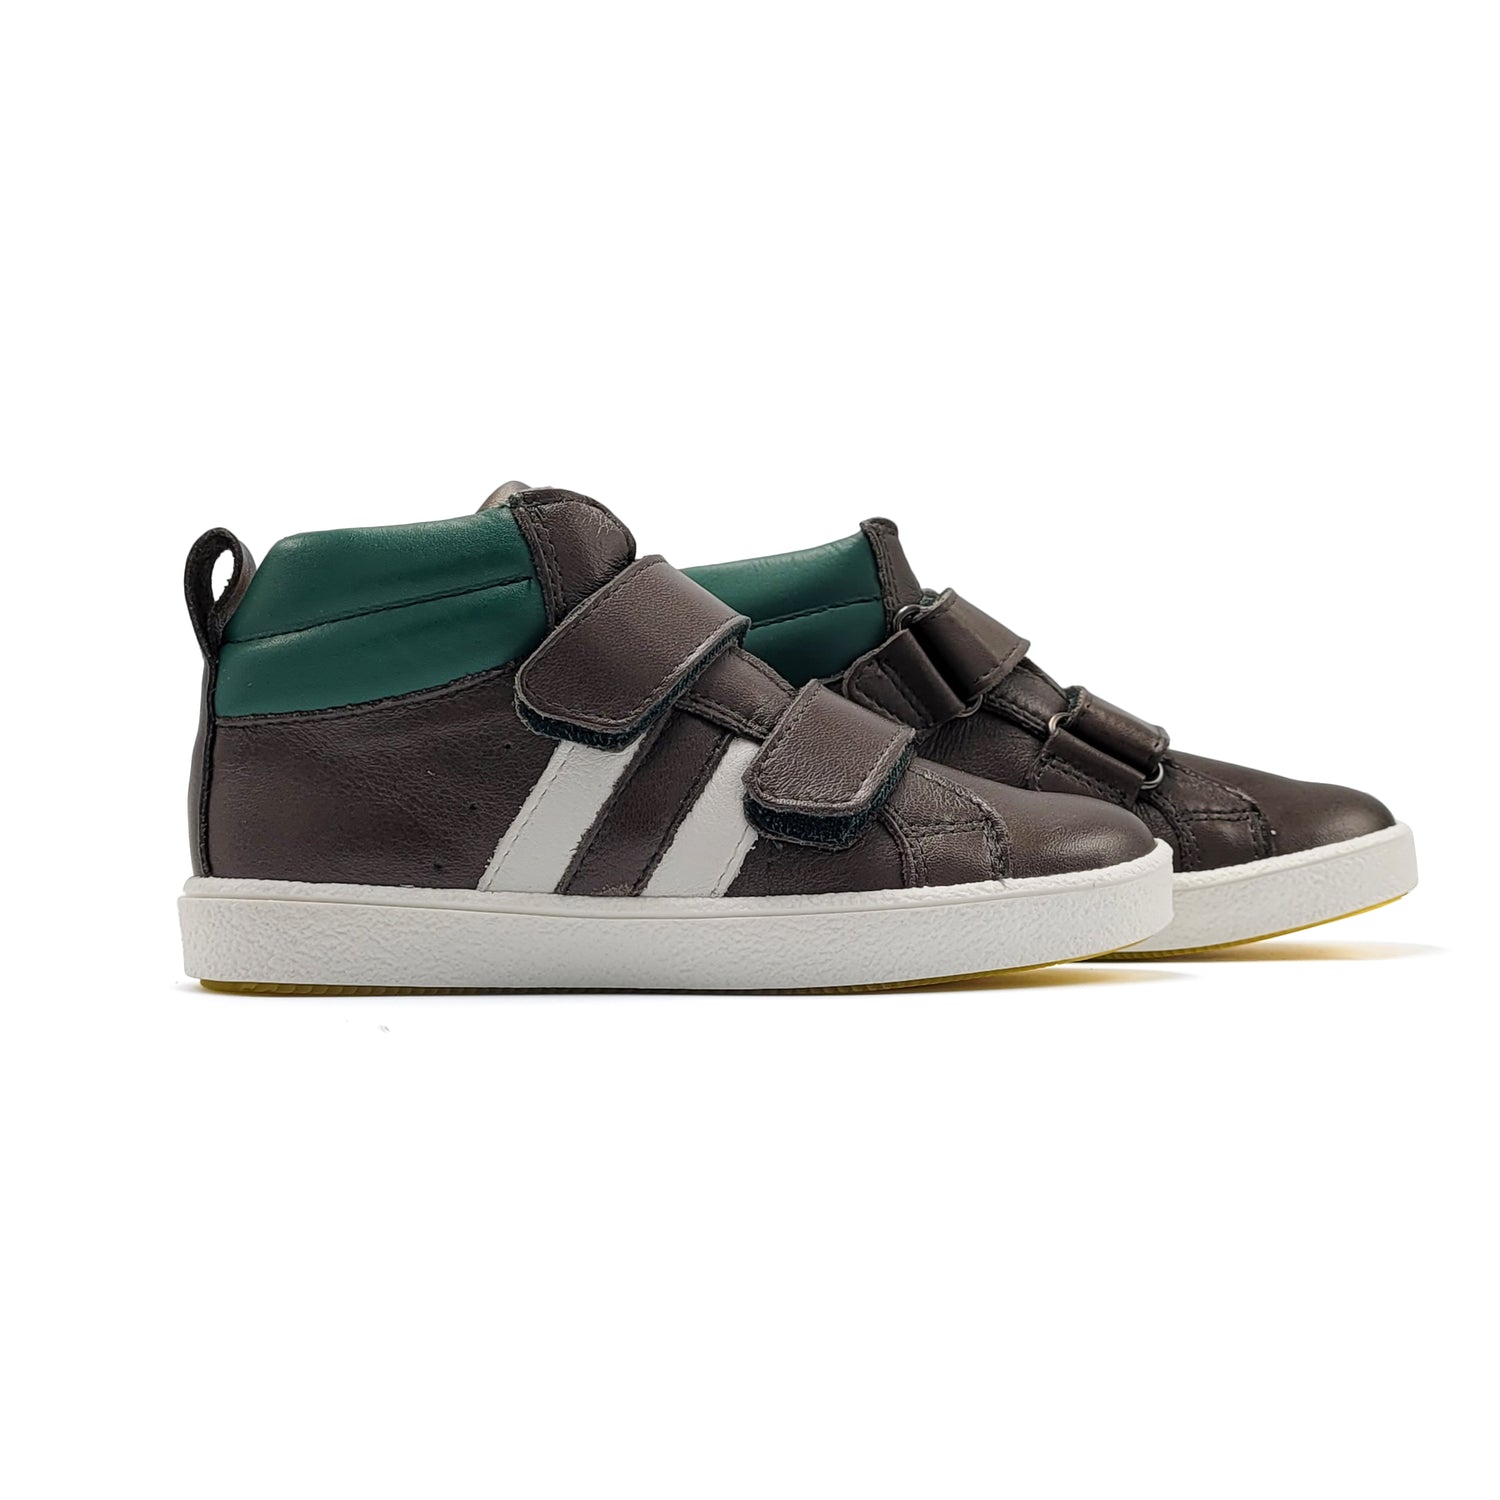 High Top Sneakers for Boys